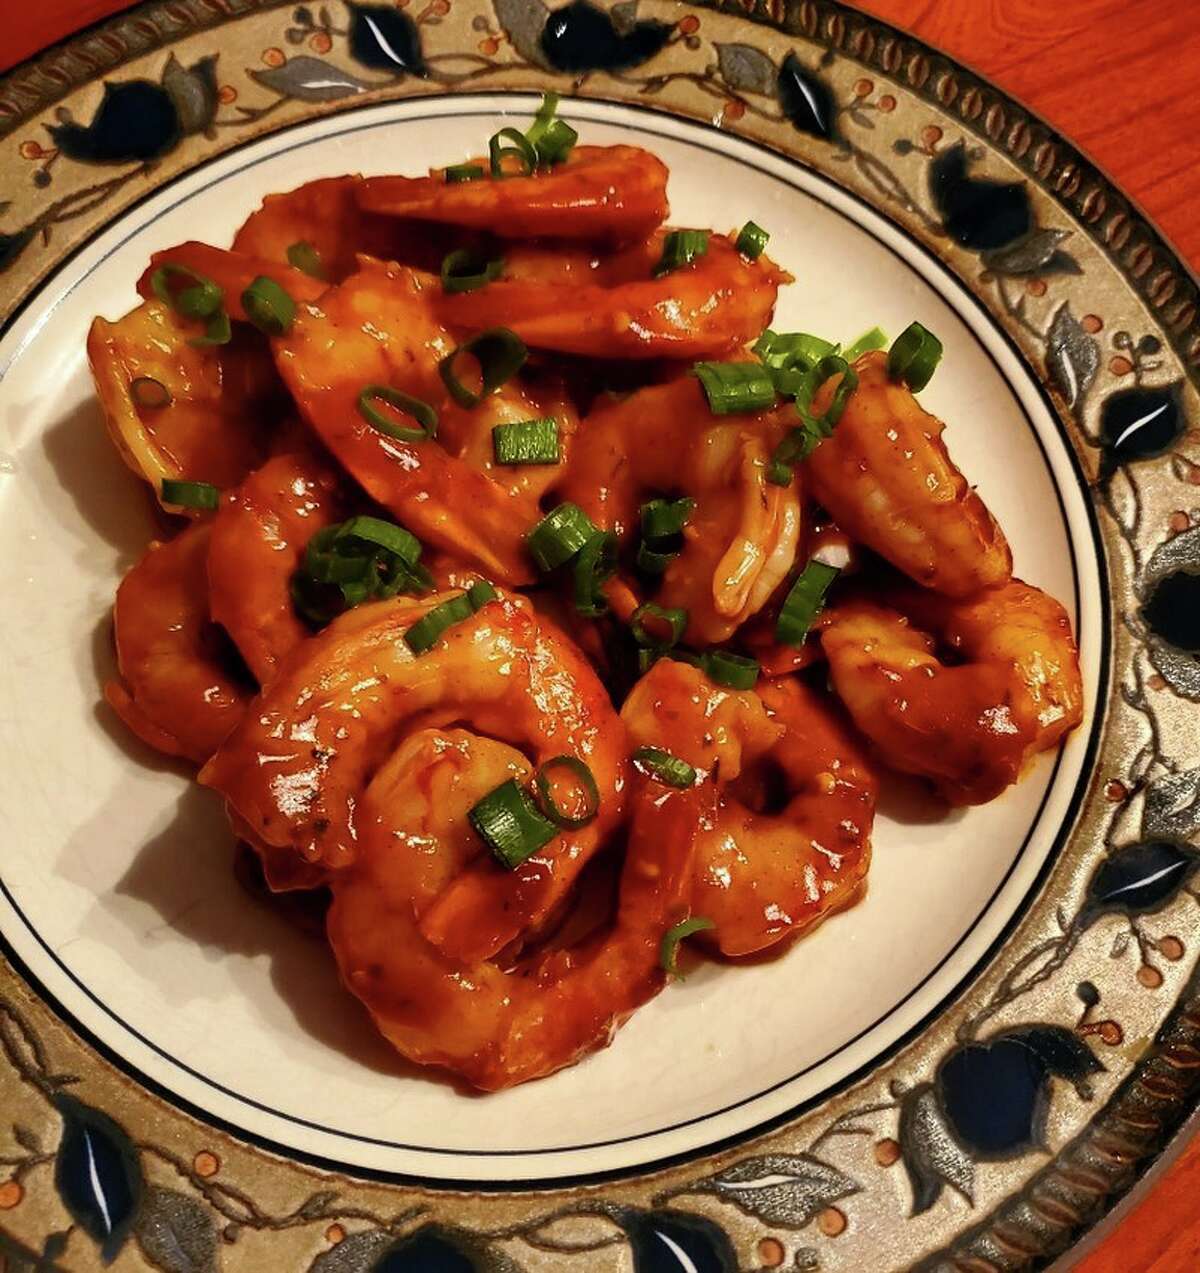 Bourbon Shrimp — sautéed wild shrimp in a sticky and spicy bourbon sauce — from The Bishop in Albany, N.Y.